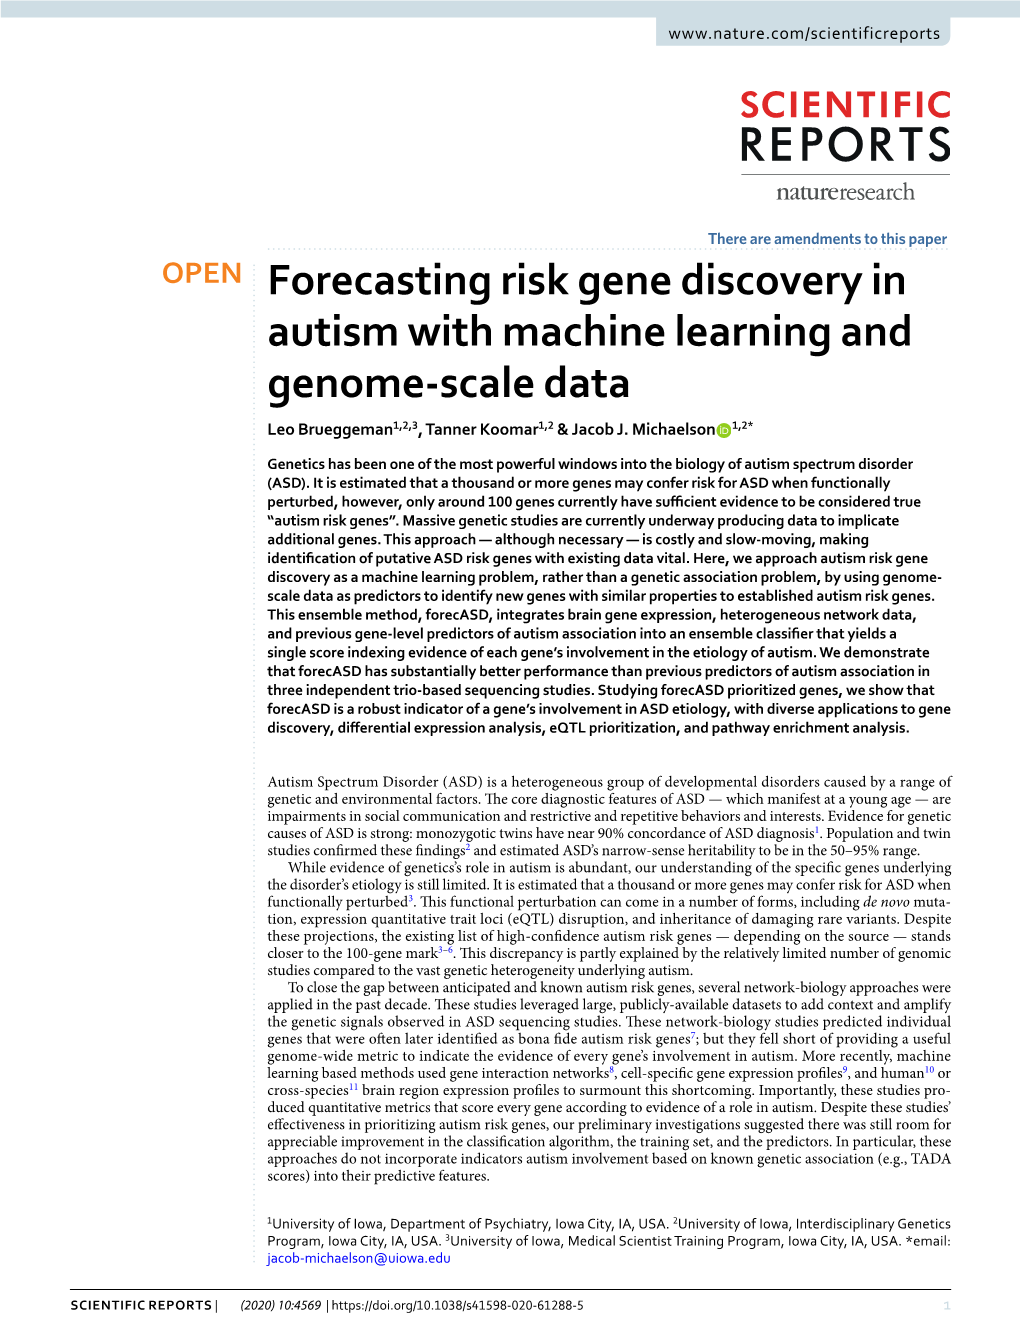 Forecasting Risk Gene Discovery in Autism with Machine Learning and Genome-Scale Data Leo Brueggeman1,2,3, Tanner Koomar1,2 & Jacob J